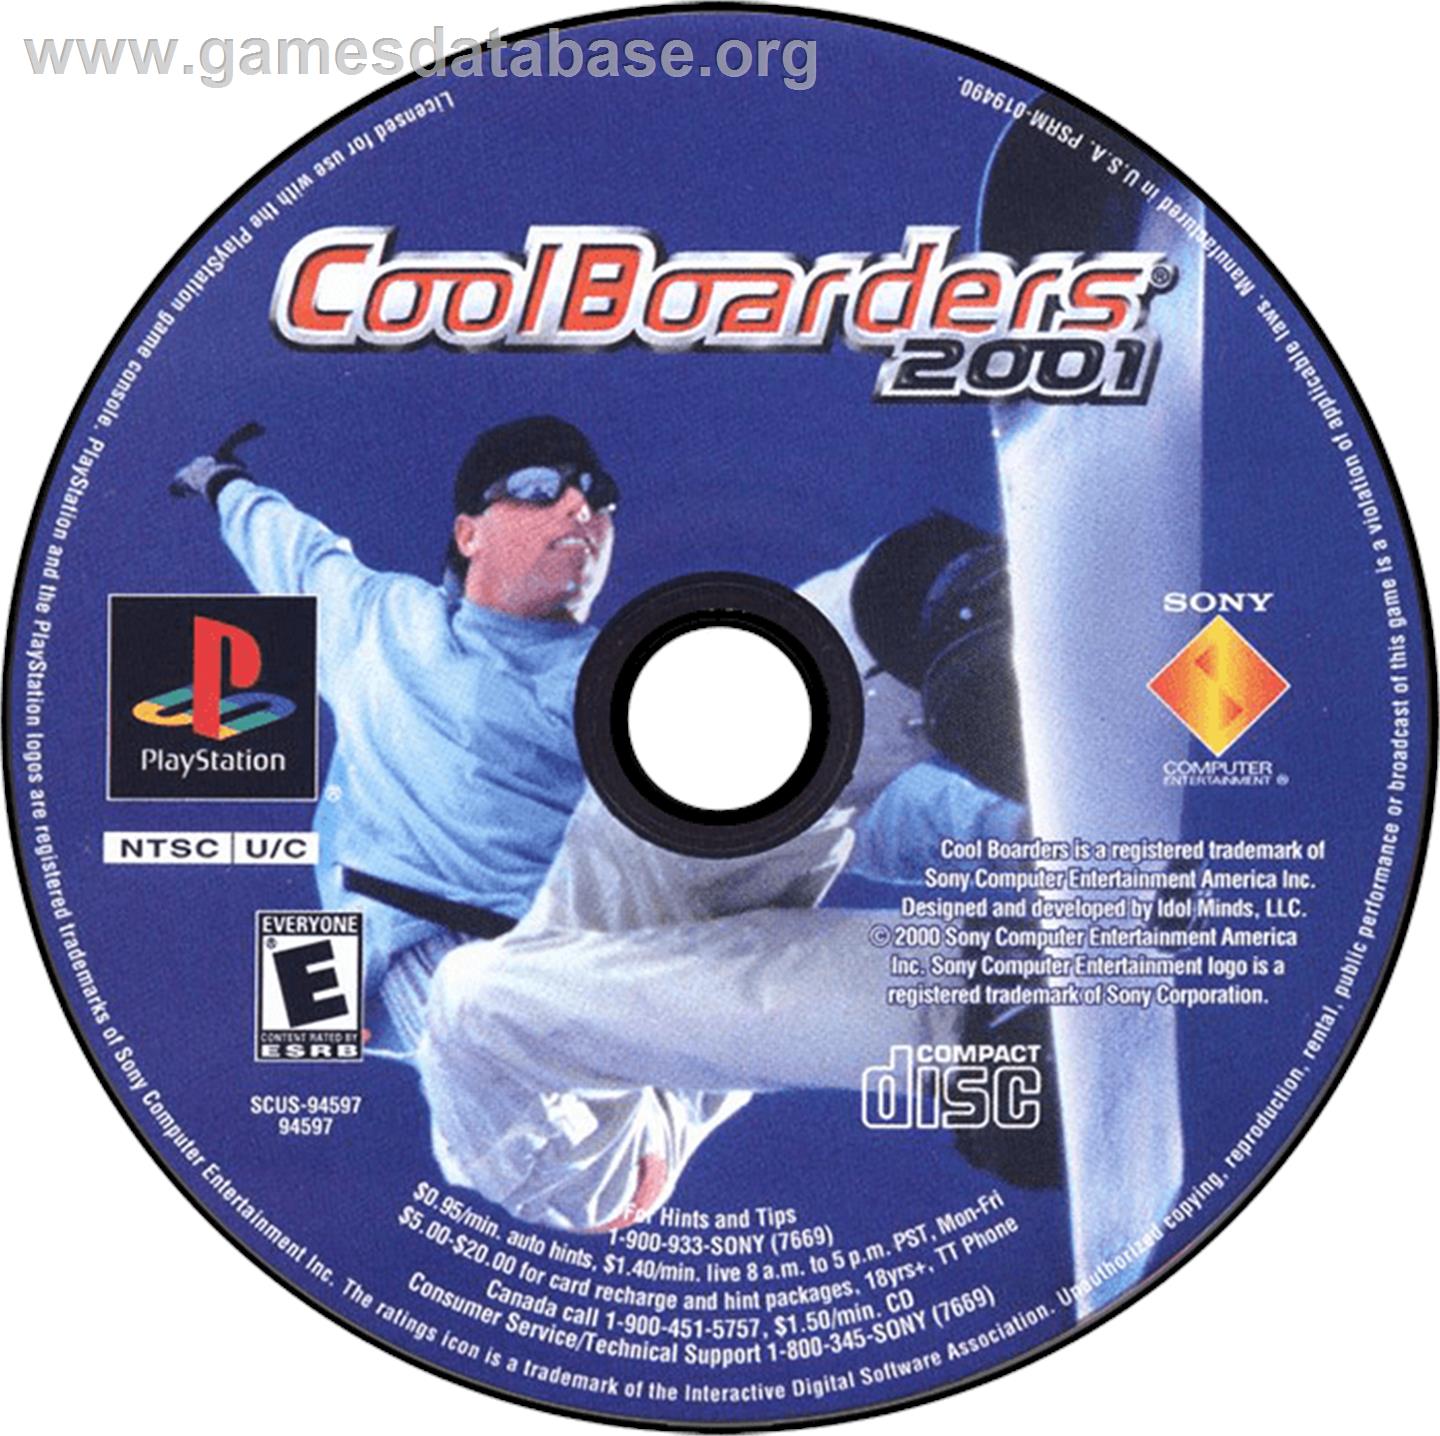 Cool Boarders 2001 - Sony Playstation - Artwork - Disc